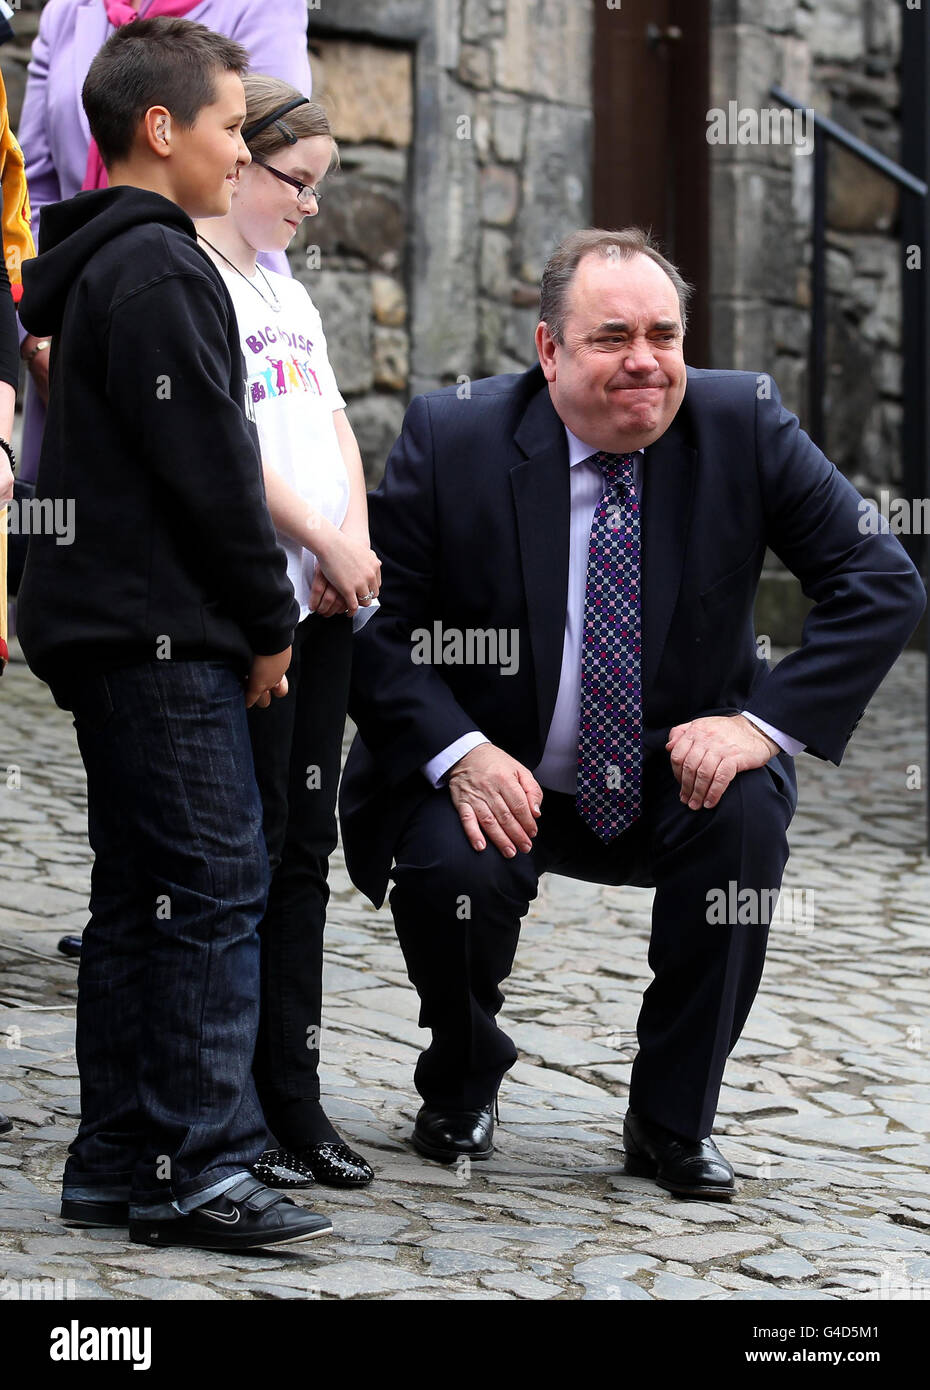 Scotland's First Minister Alex Salmond, reacts as he gets back to his feet after crouching down to talk with children from the Big Noise group who performed for Queen Elizabeth II, during a visit to Stirling Castle where the Queen re-opened the James V Palace at the castle, following a 12 million project which has returned the six apartments in the castle's Renaissance palace to how they may have looked in the mid-16th century. Stock Photo